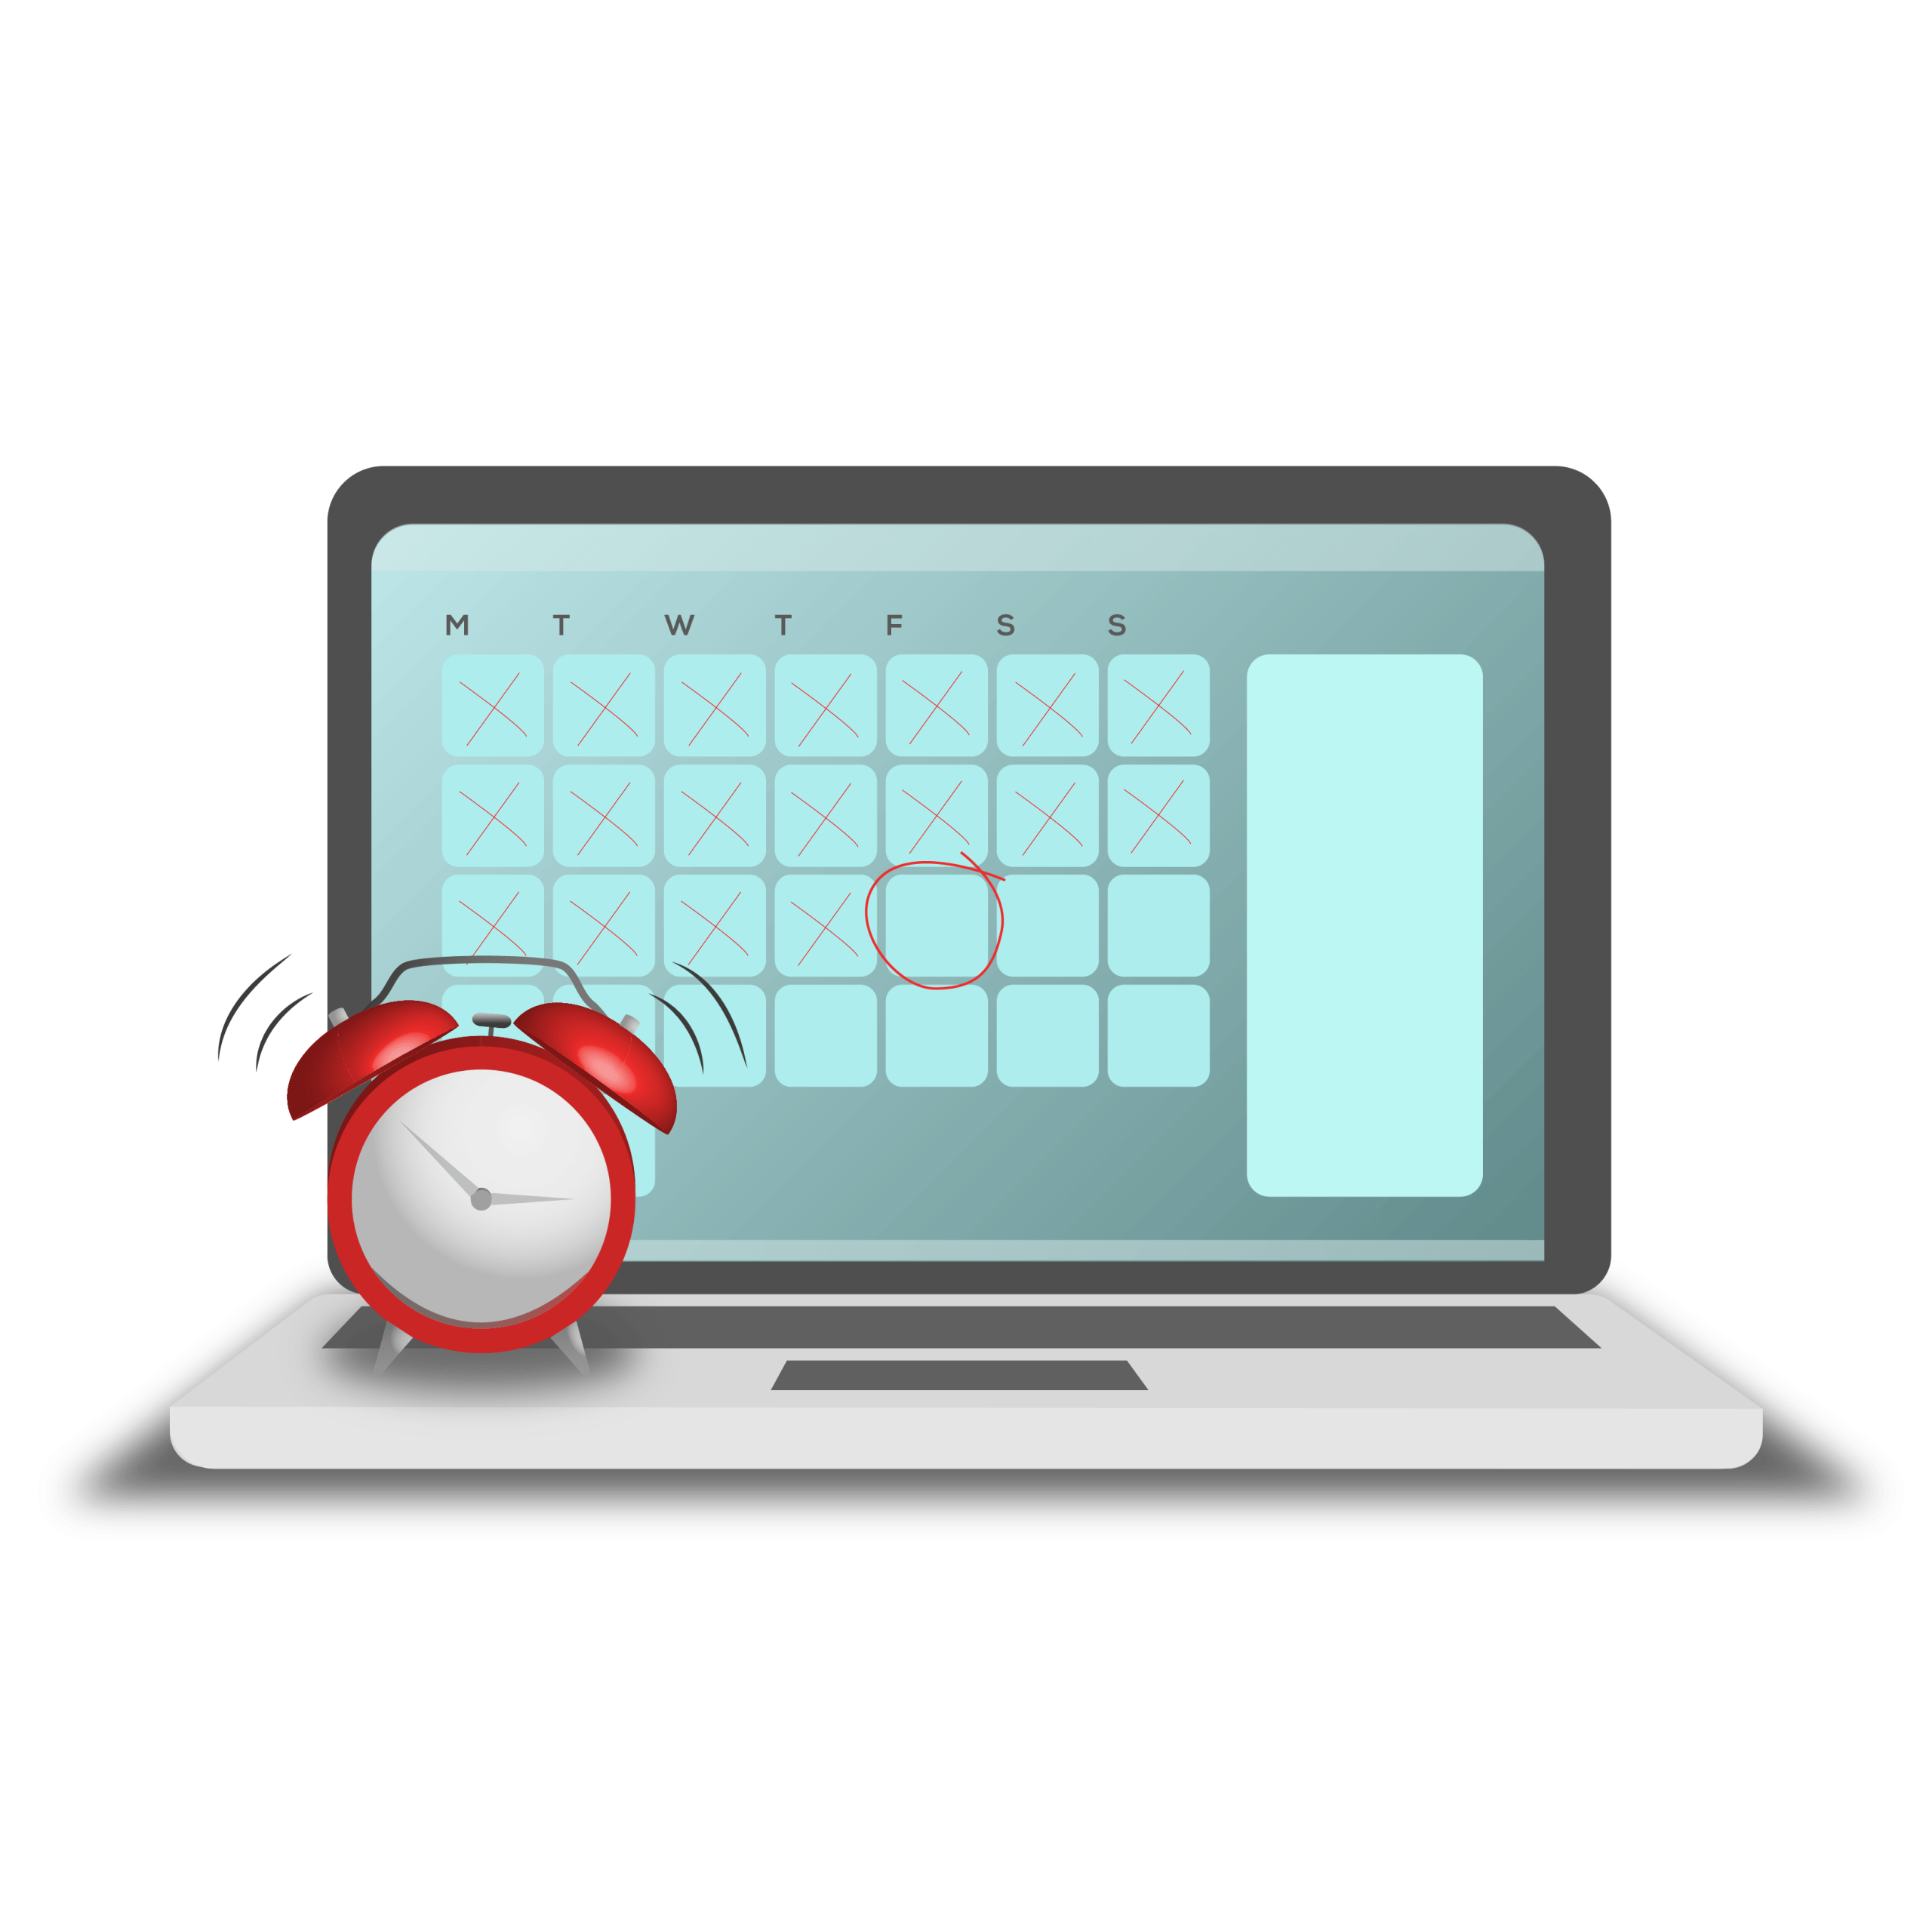 a calendar showing dates on a laptop screen with an alarm clock 